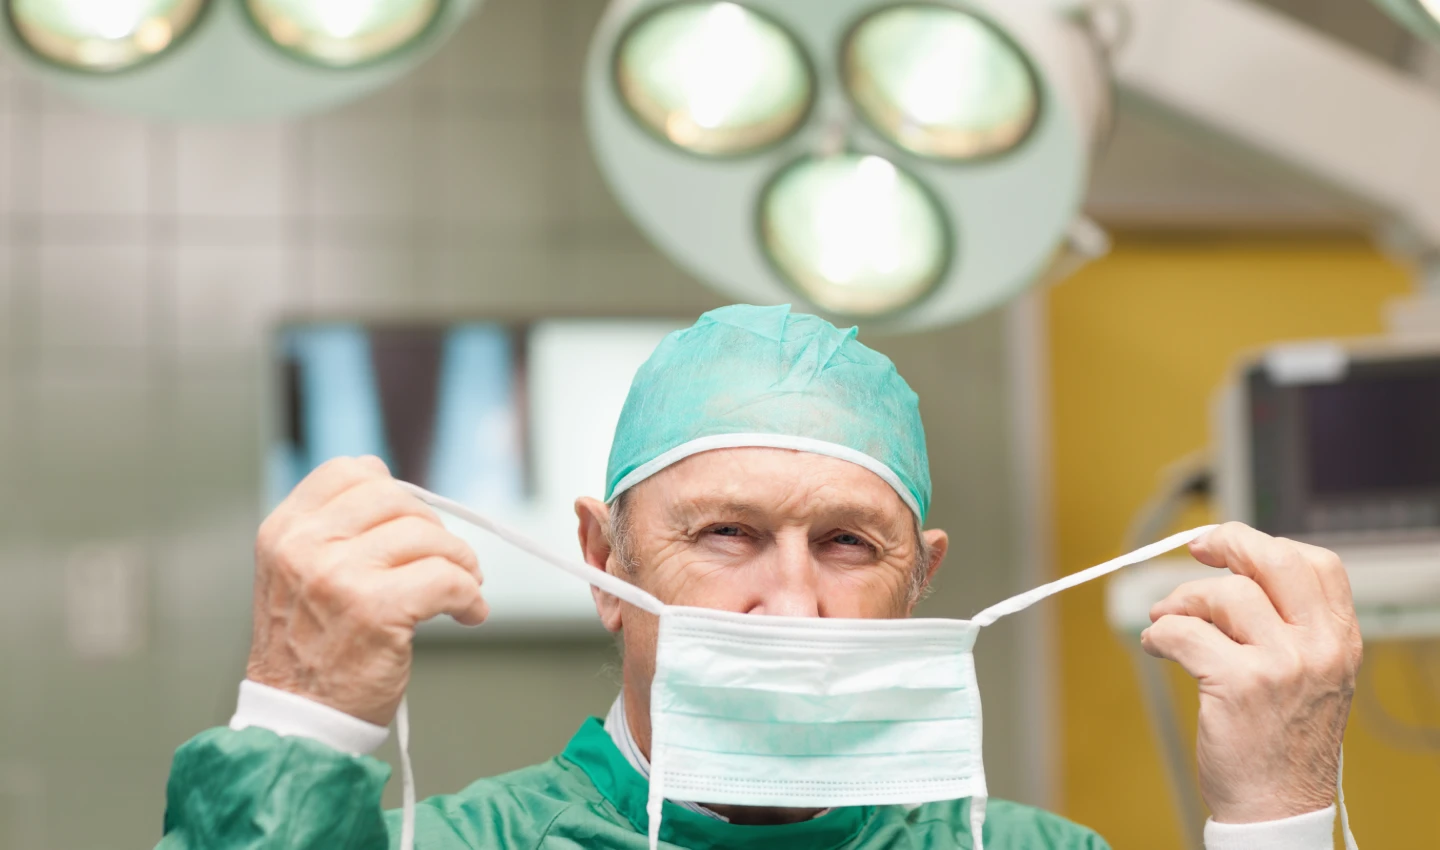 A doctor in surgical scrubs prepares for a body beauty surgery procedure, underscoring the significance of proper regulation in safeguarding patients' safety.